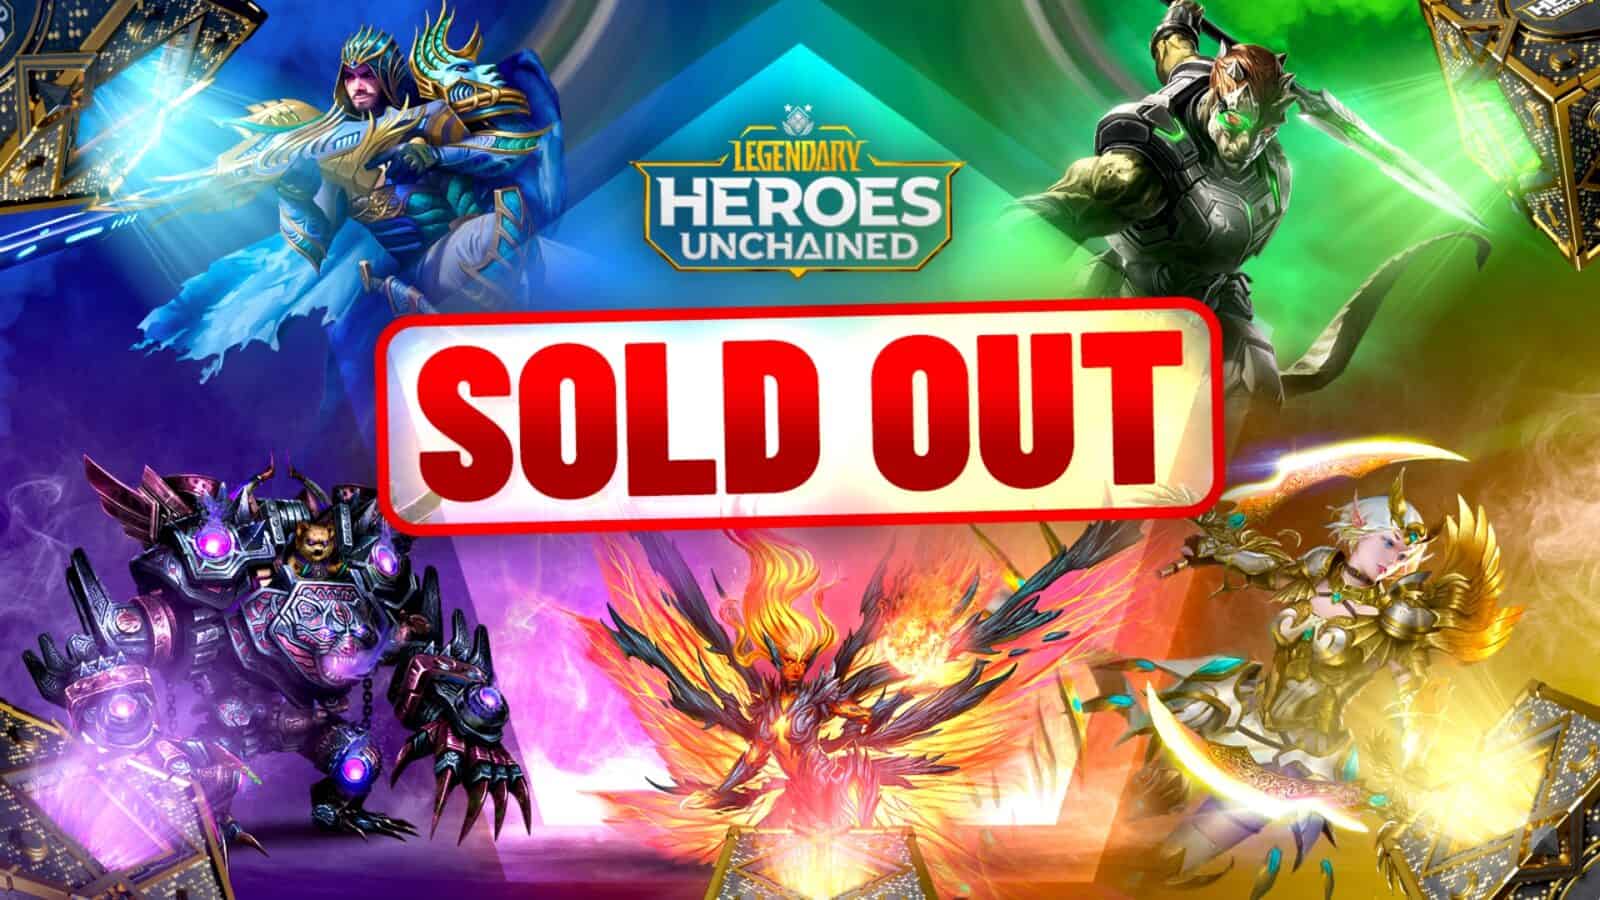 RPG Game Legendary: Heroes Unchained Announces the Sellout of all 5,000 Royalty Passes